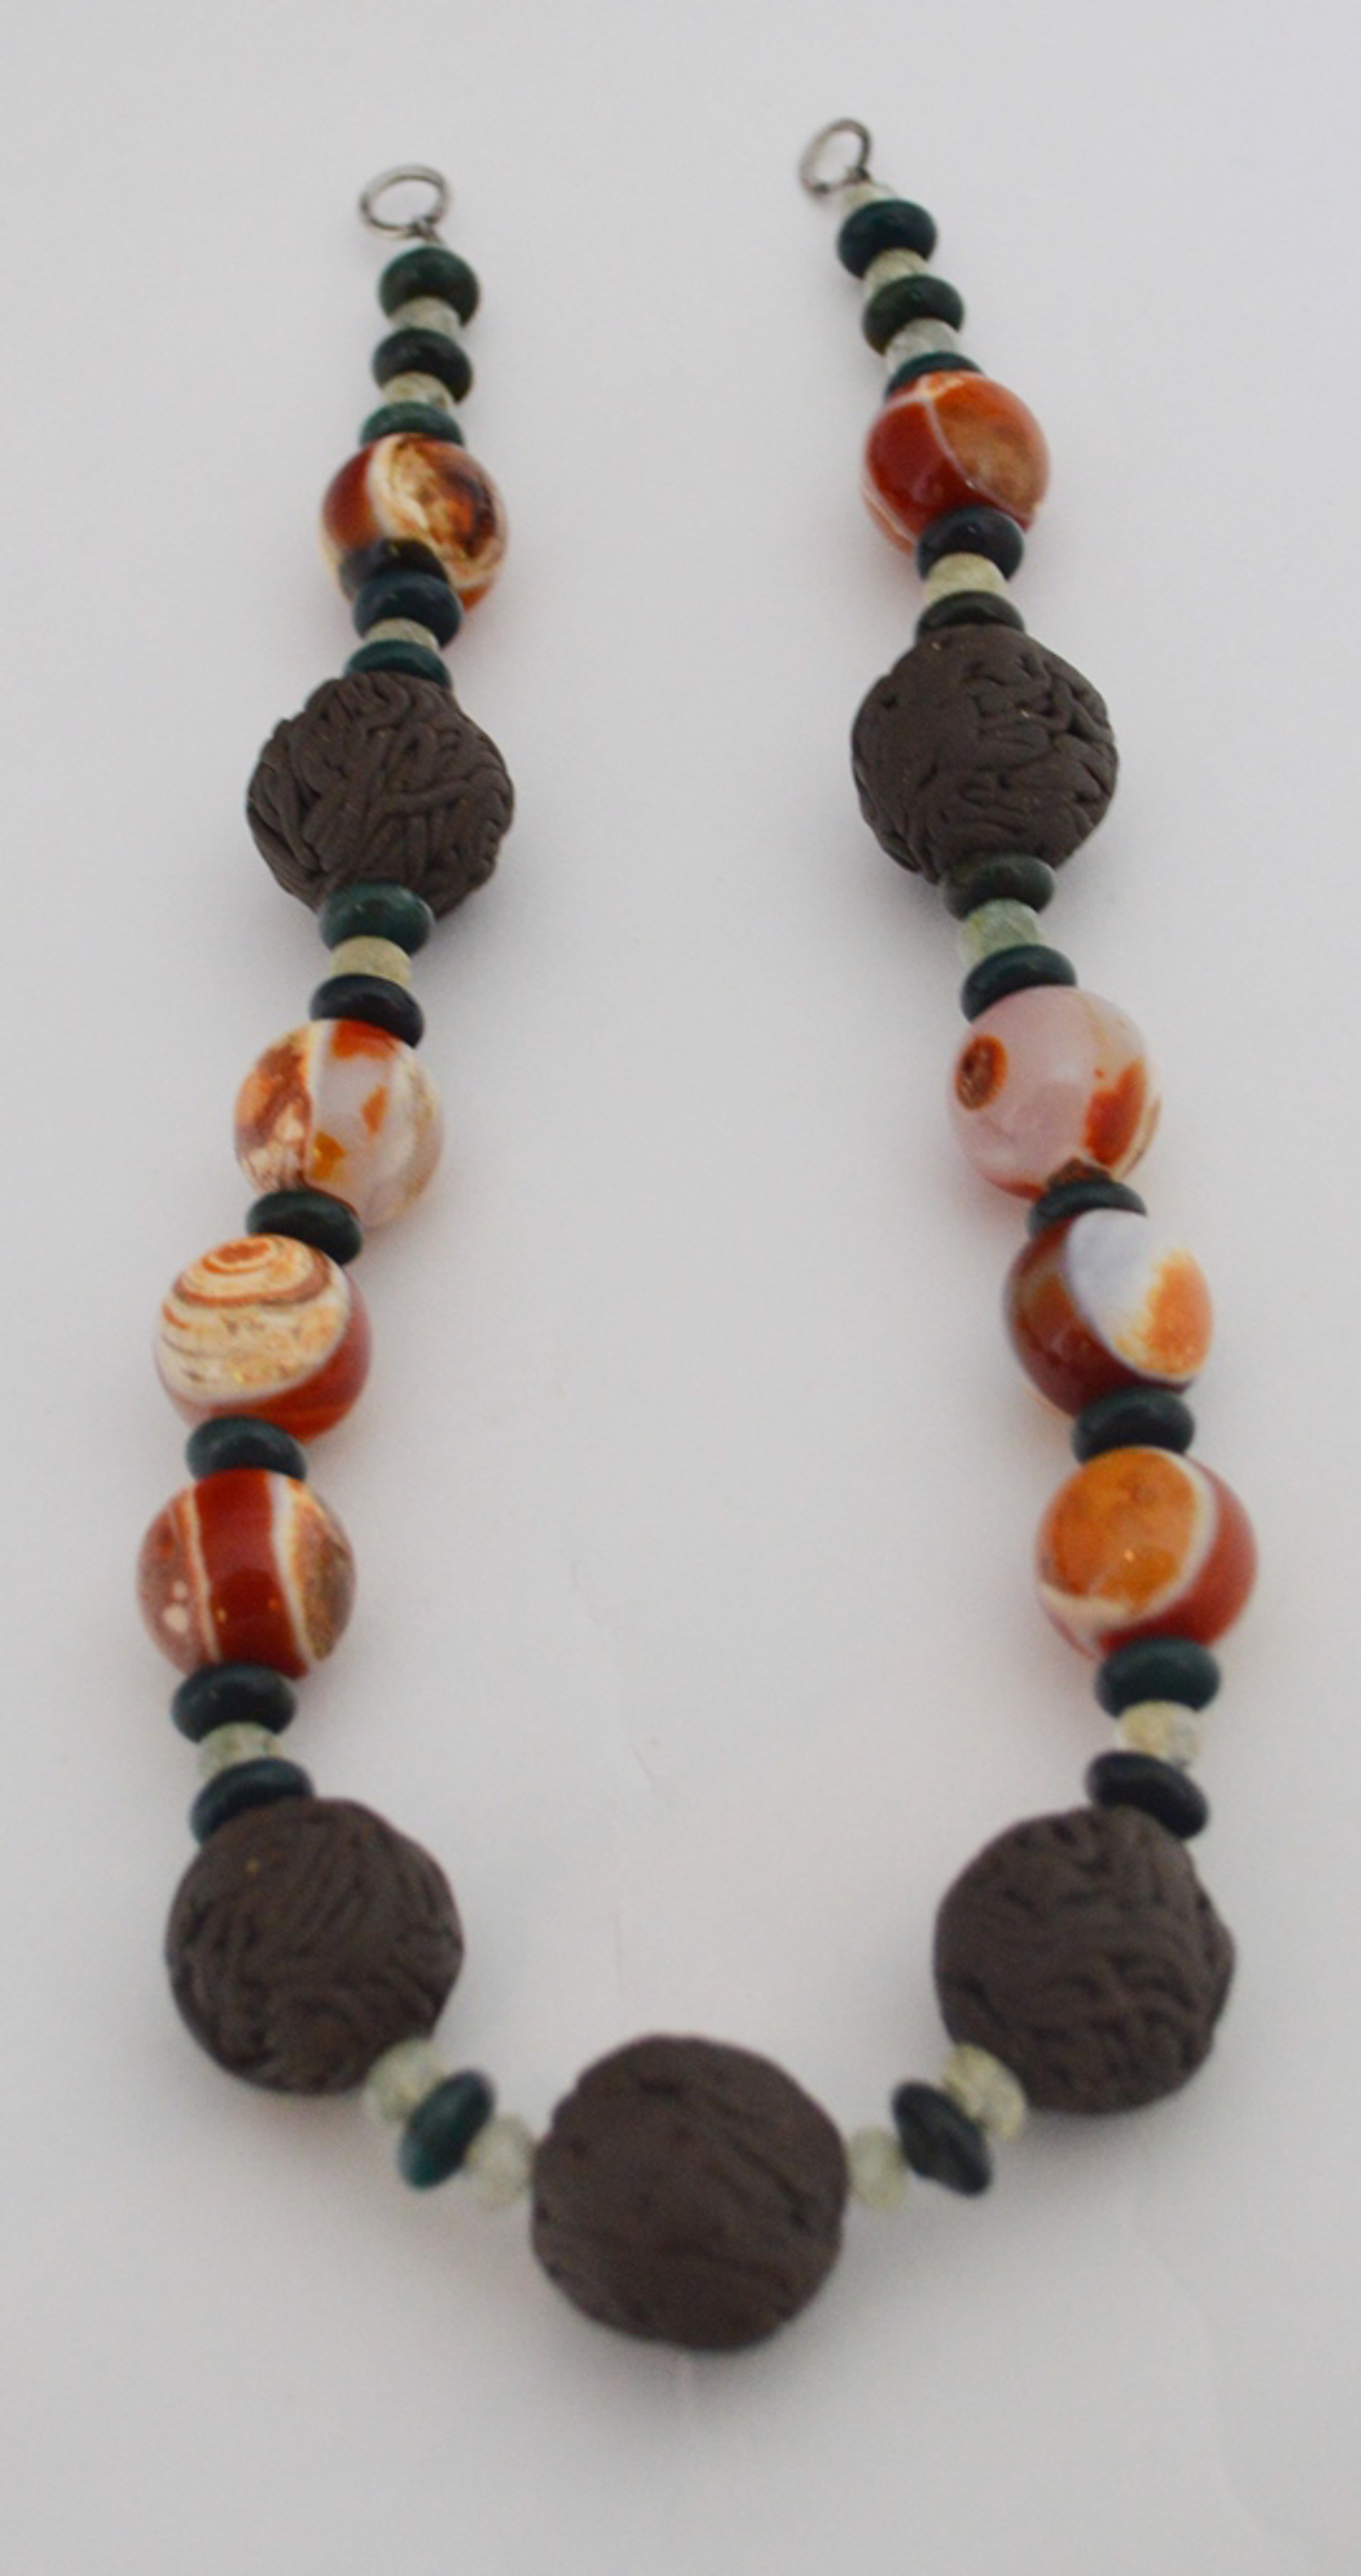 Ancient Agate, Glass, & Clay Bead Necklace with Sterling Clasp by Mary Lynn Portera